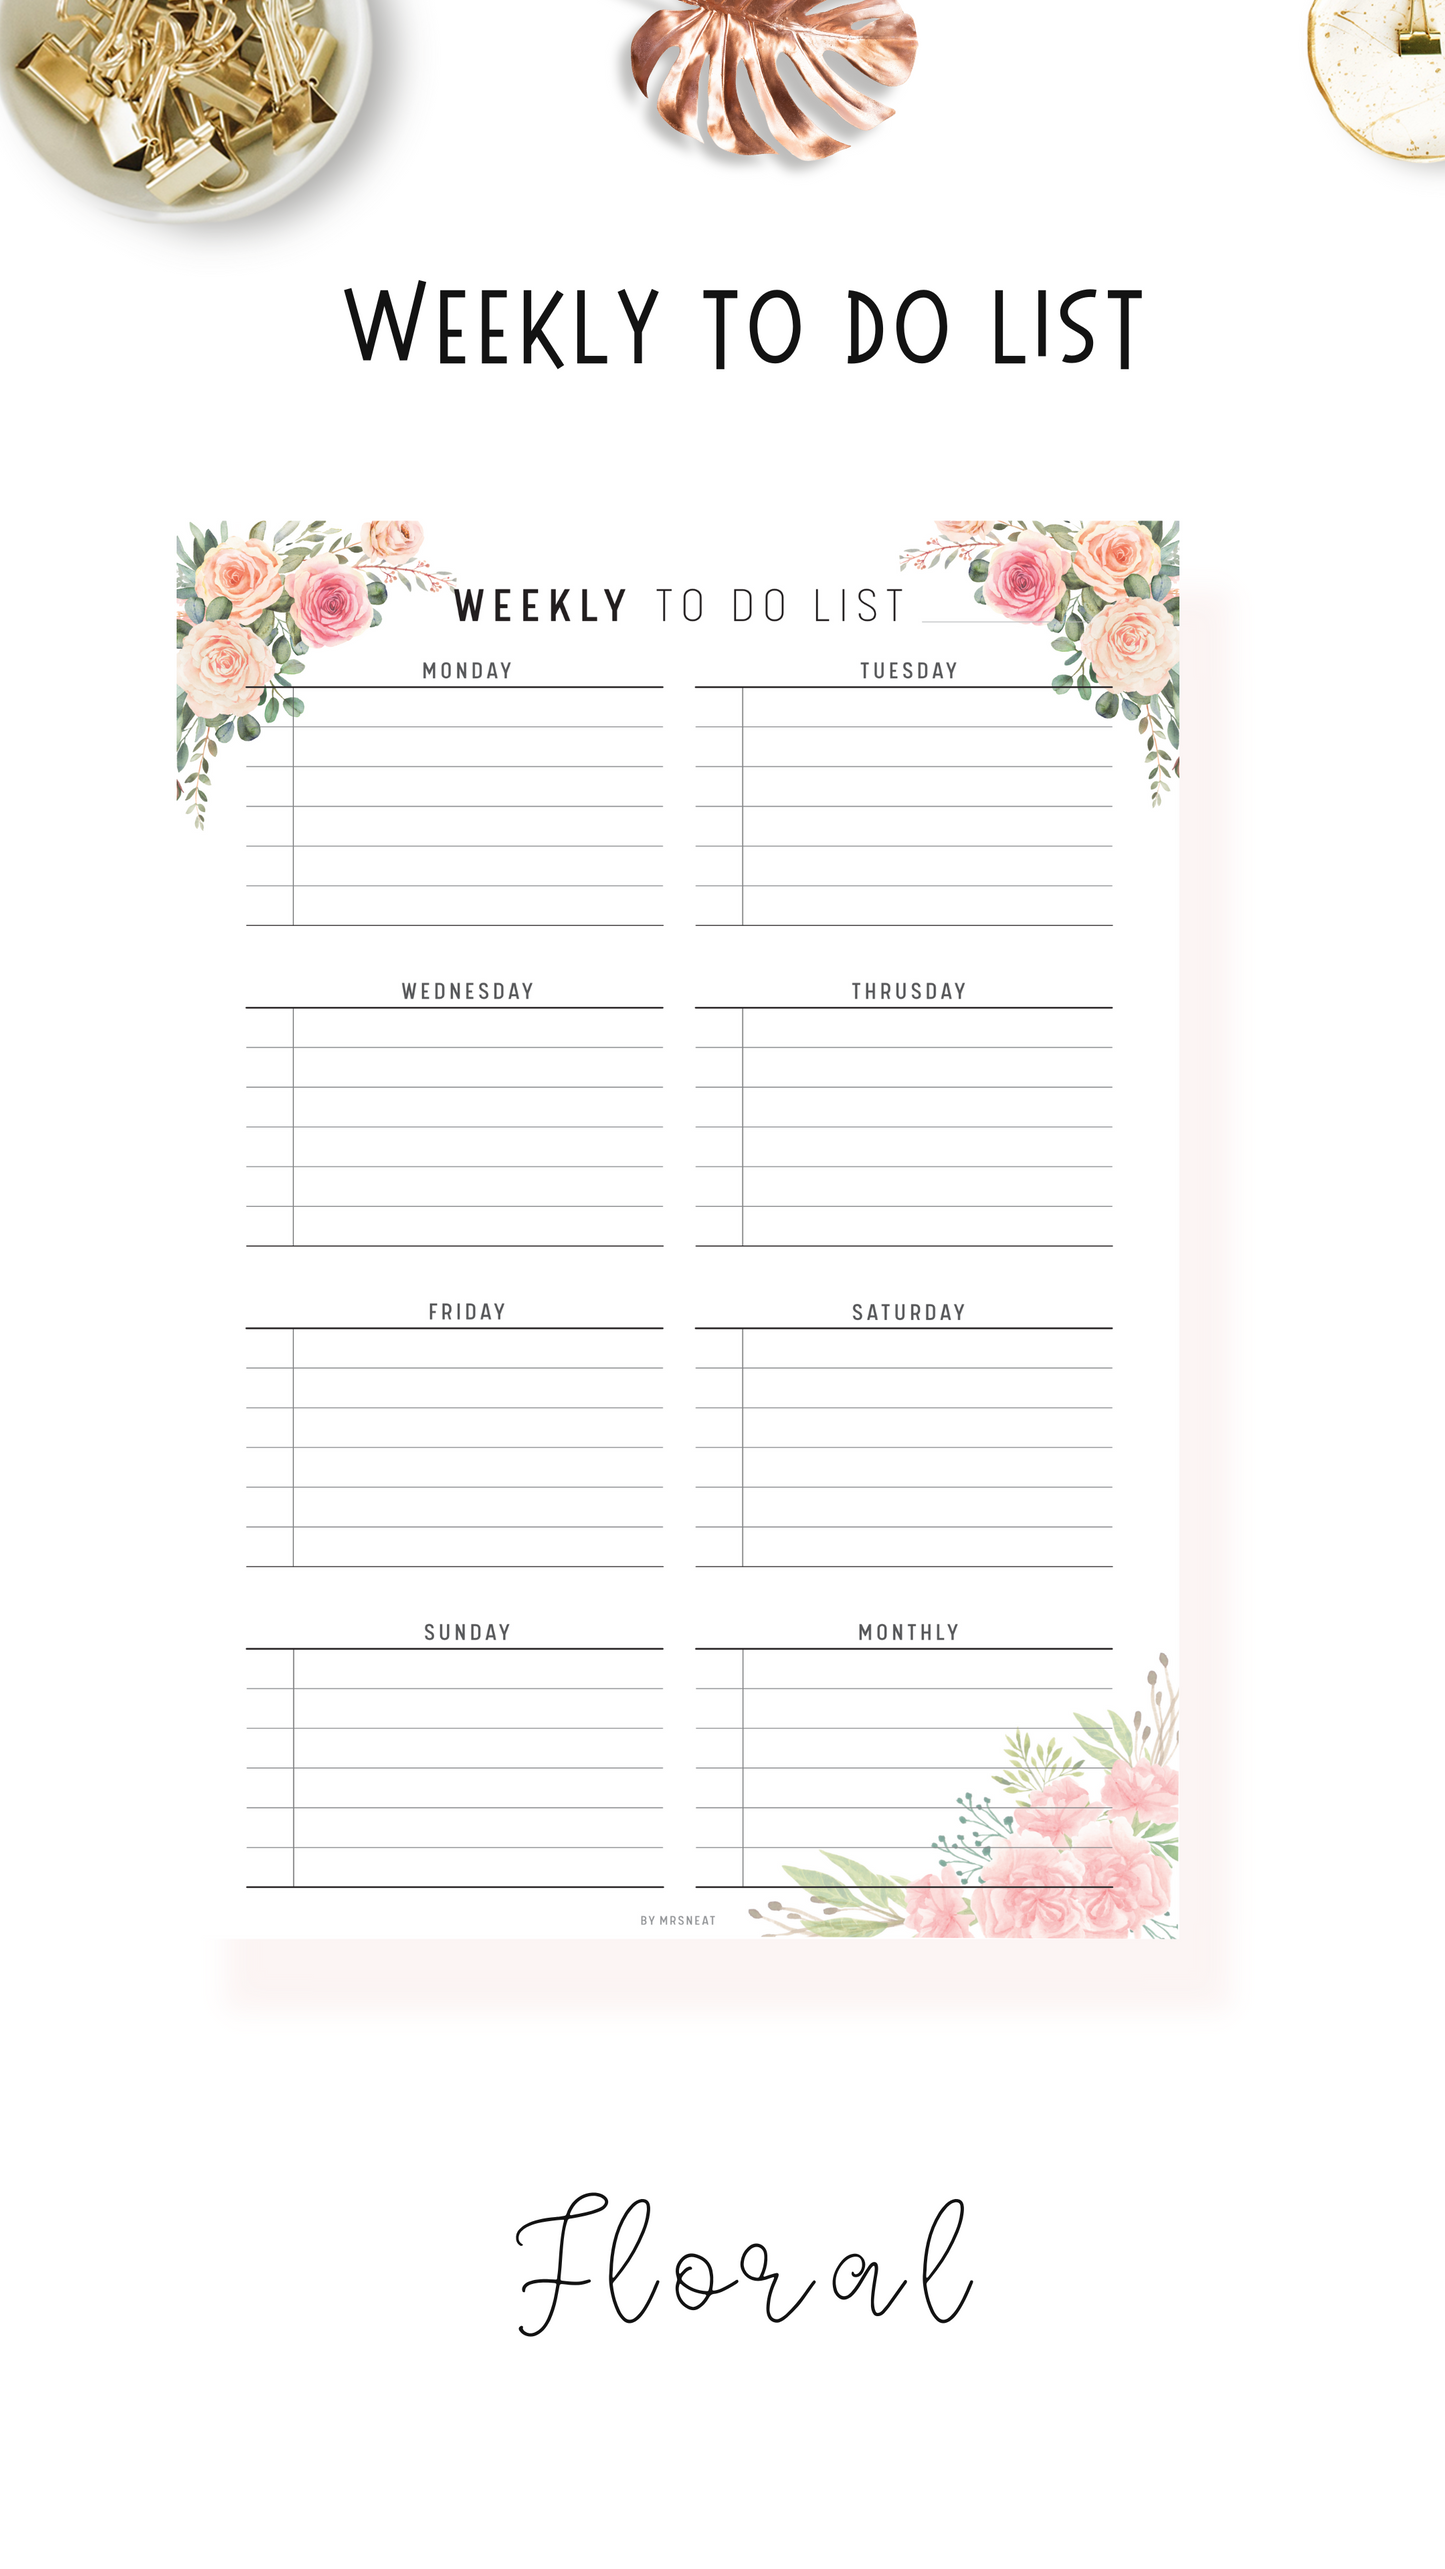 Weekly & Daily To Do List Printable